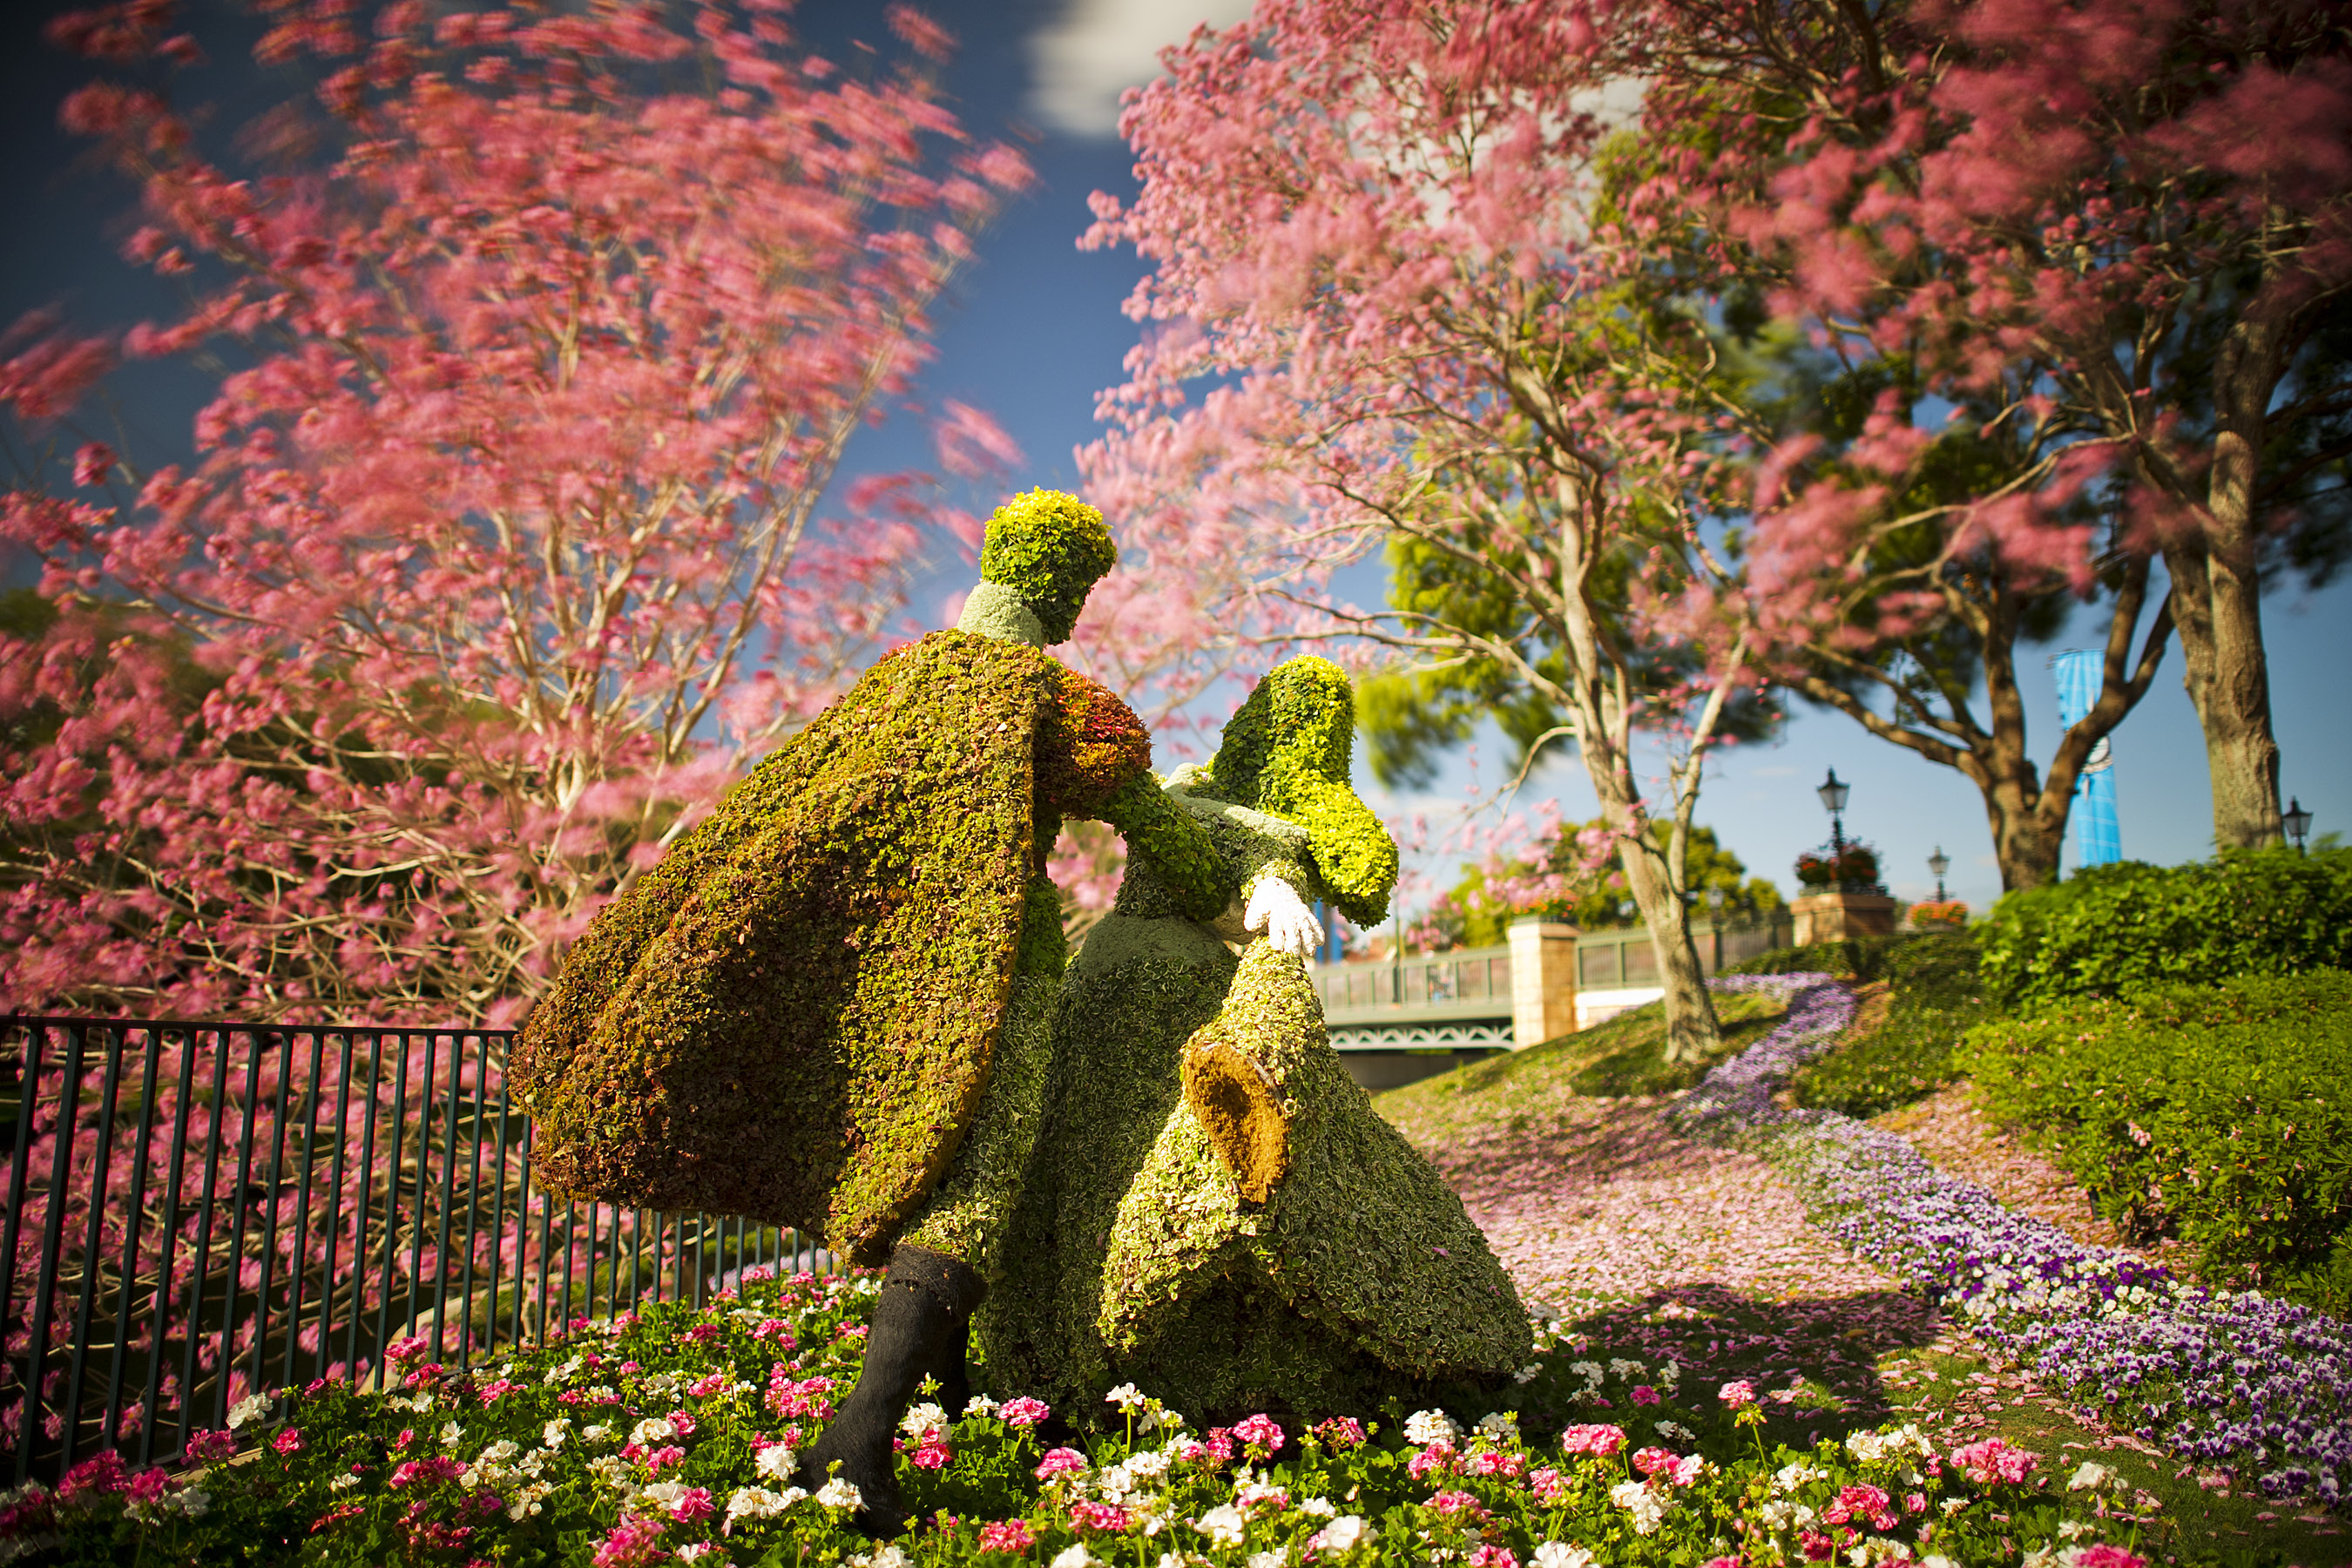 thriving ecosystems”, topiaries from frozen and much more at epcot